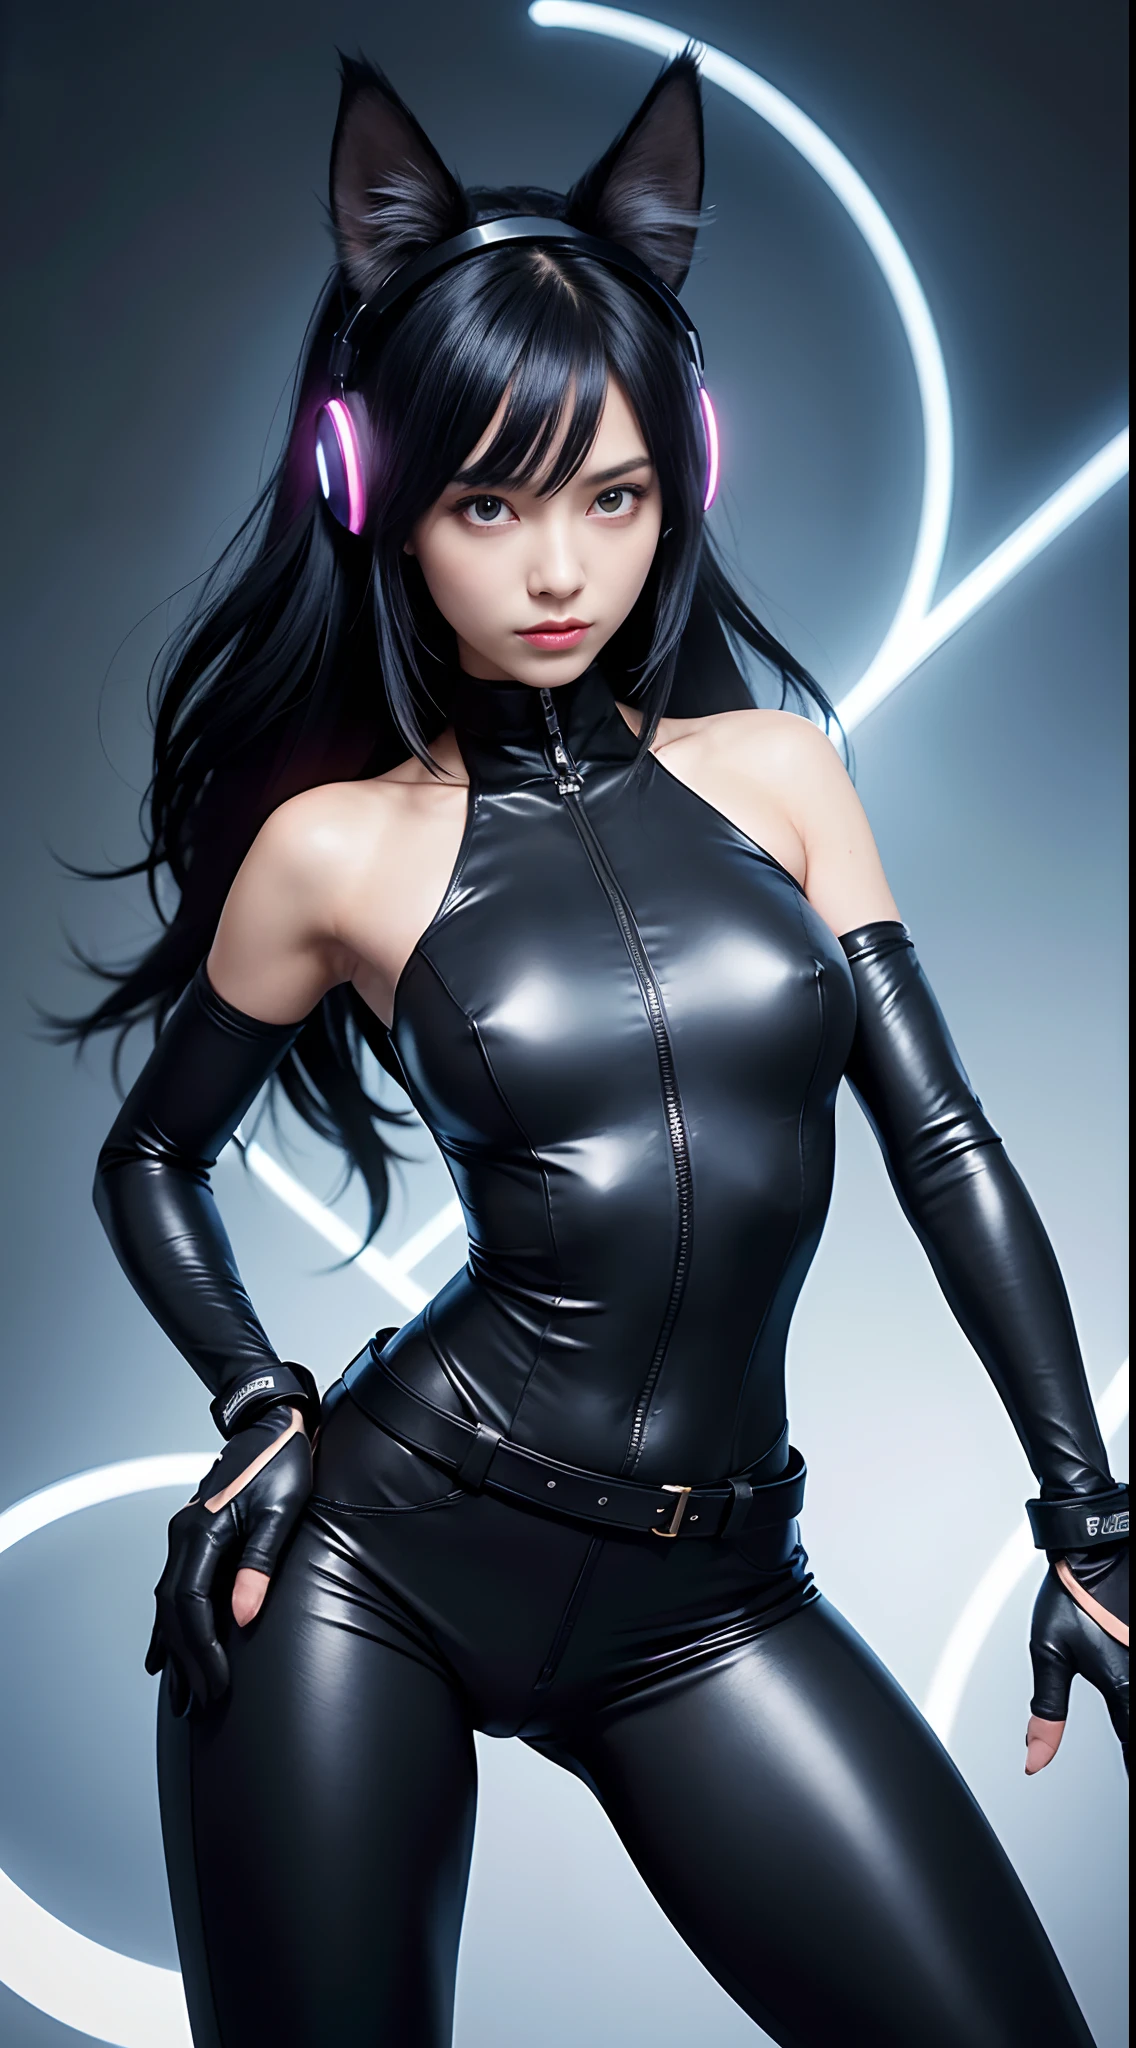 (Best Quality,4K,High resolution), 18yo woman, femele，Feminization of black cats，Cat's ears，Cat Ear Headphones，black longhair，Blue mesh hair，Big eyes，sharp eye，Cold eyes，glares，Big claws，Nail Gloves，Stance，dishevled hair，calm character，Cool Woman，Black and blue，Sleeveless，Tight leather suit，highleg，cross belt，Navel out，Skin revealing，knee sox，garterbelts，Cat tail，Delicately drawn illustrations，Vivid color scheme，colourfull，Delicately expressed body，Delicately realistically reproduced facial expressions，futuristic background，Facial expression camera up